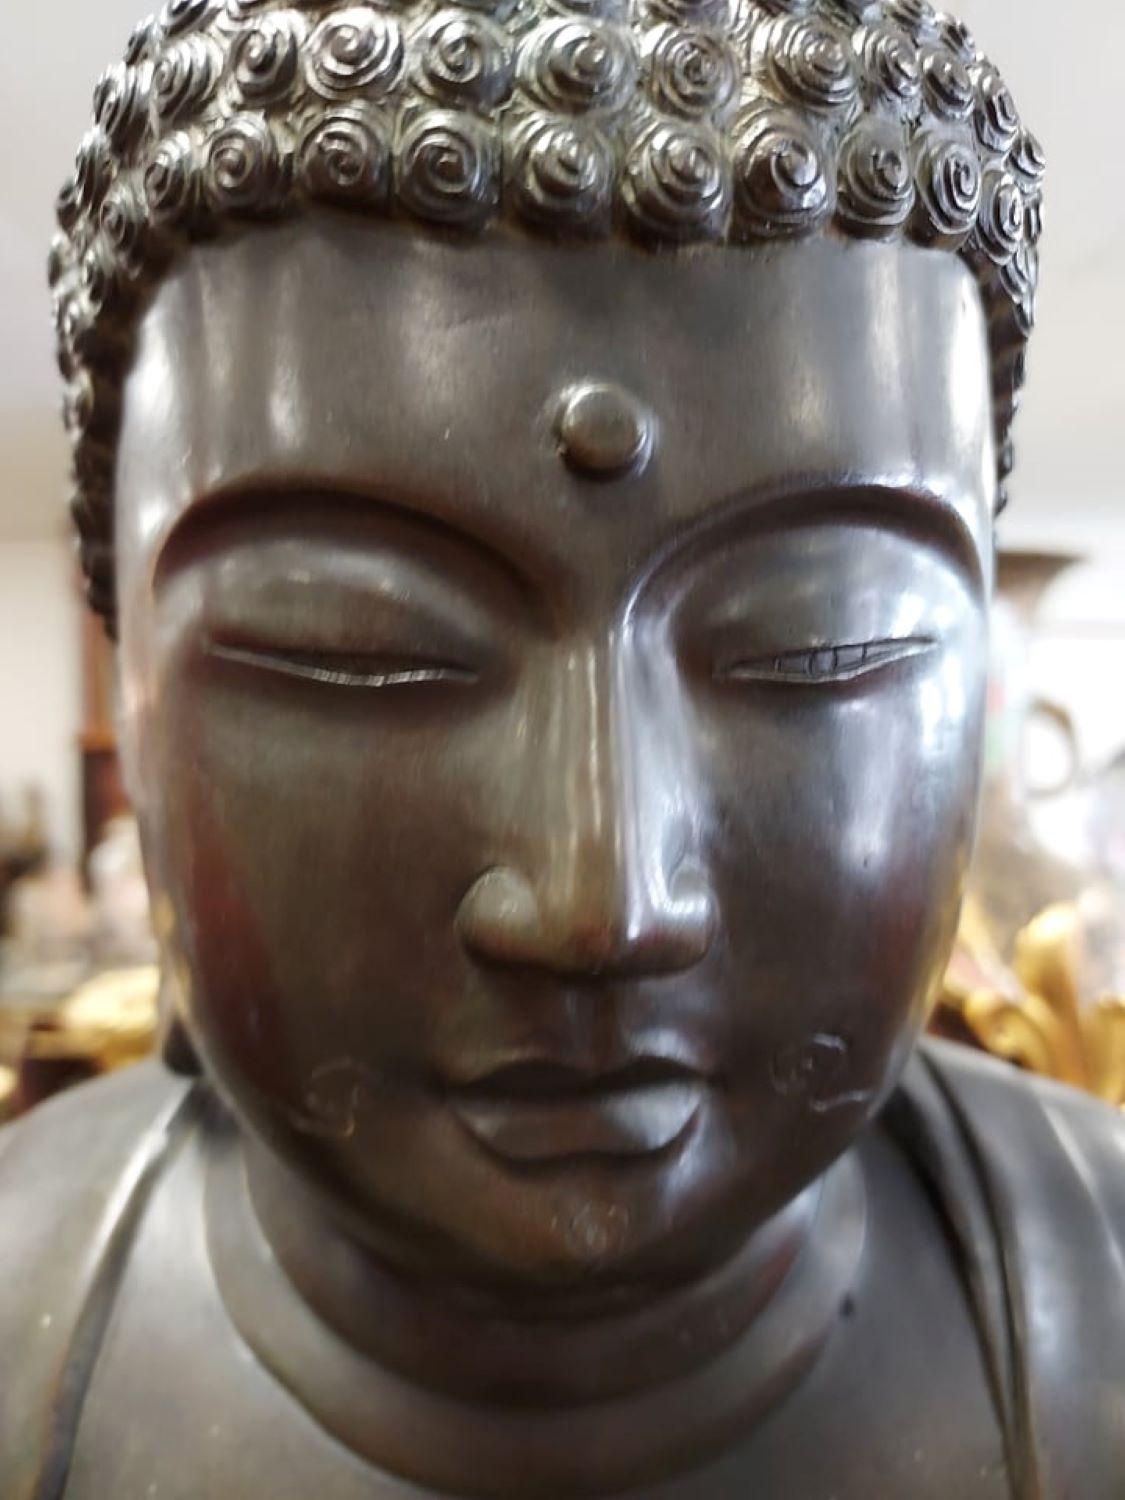 Old Style Serenity Buddha Statue Japan - Sculpture by Unknown